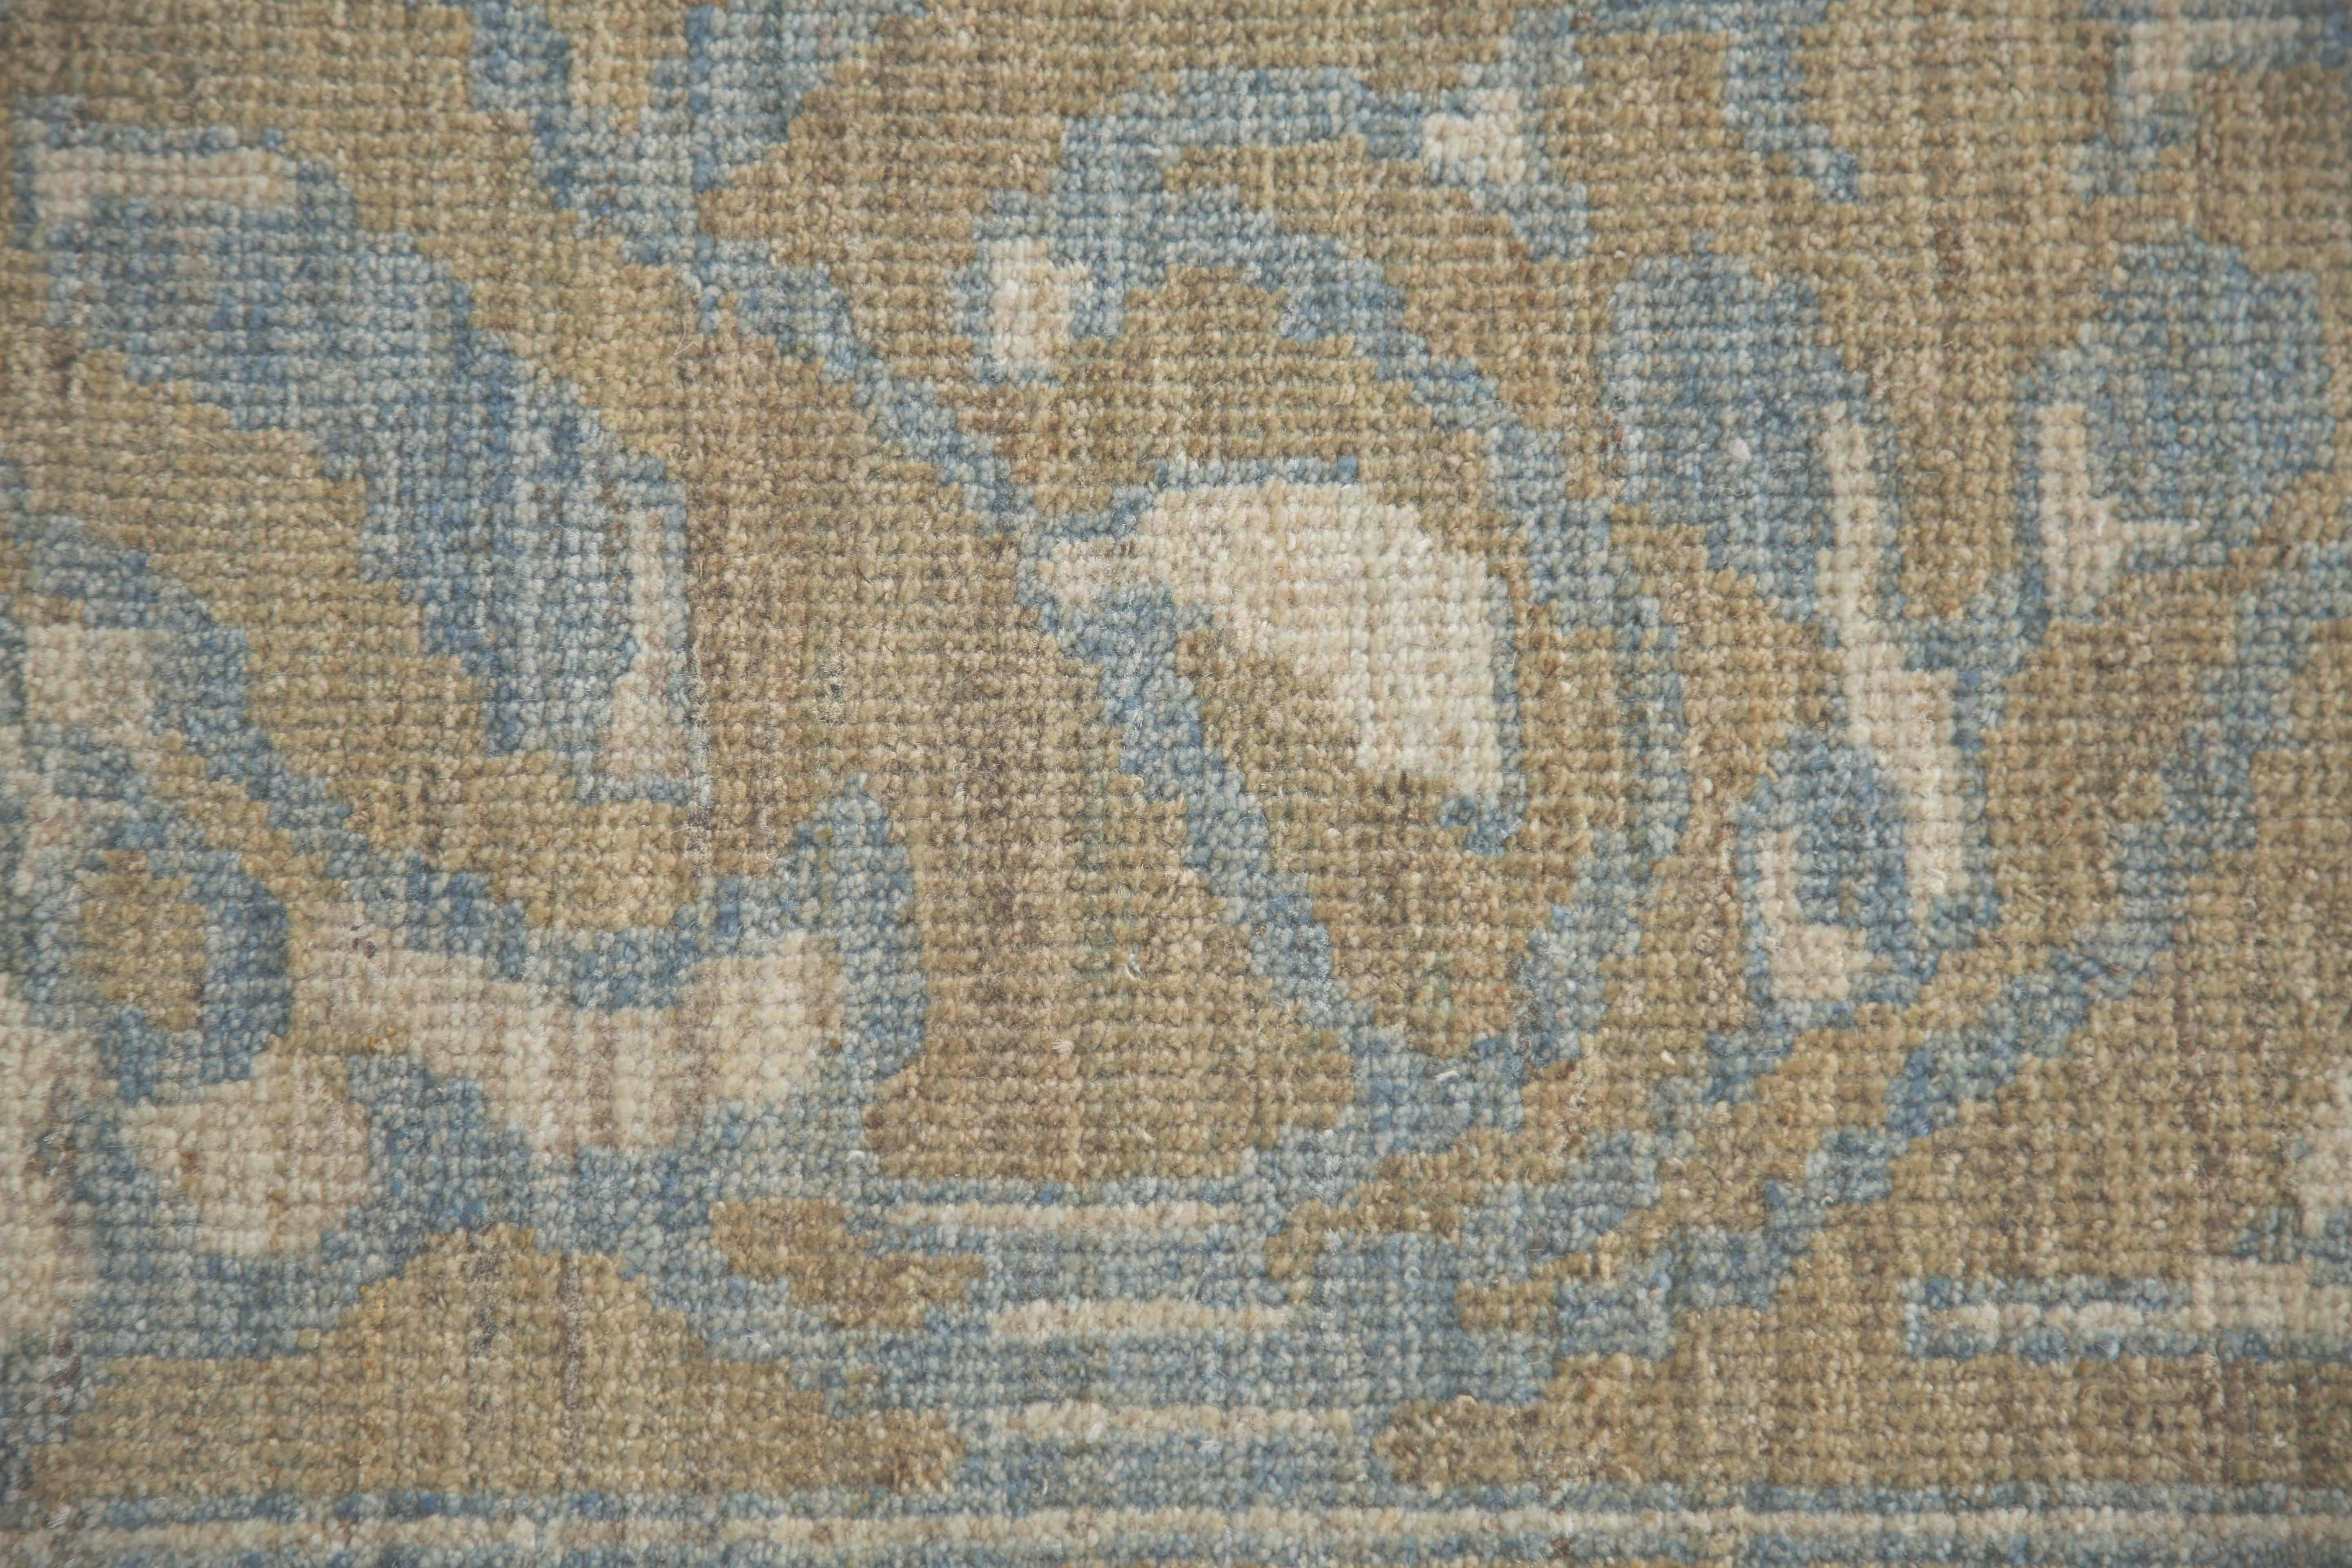 Wool Luxurious Handmade Sultanabad Rug - Transitional Design, Blue, Green, and Yellow For Sale